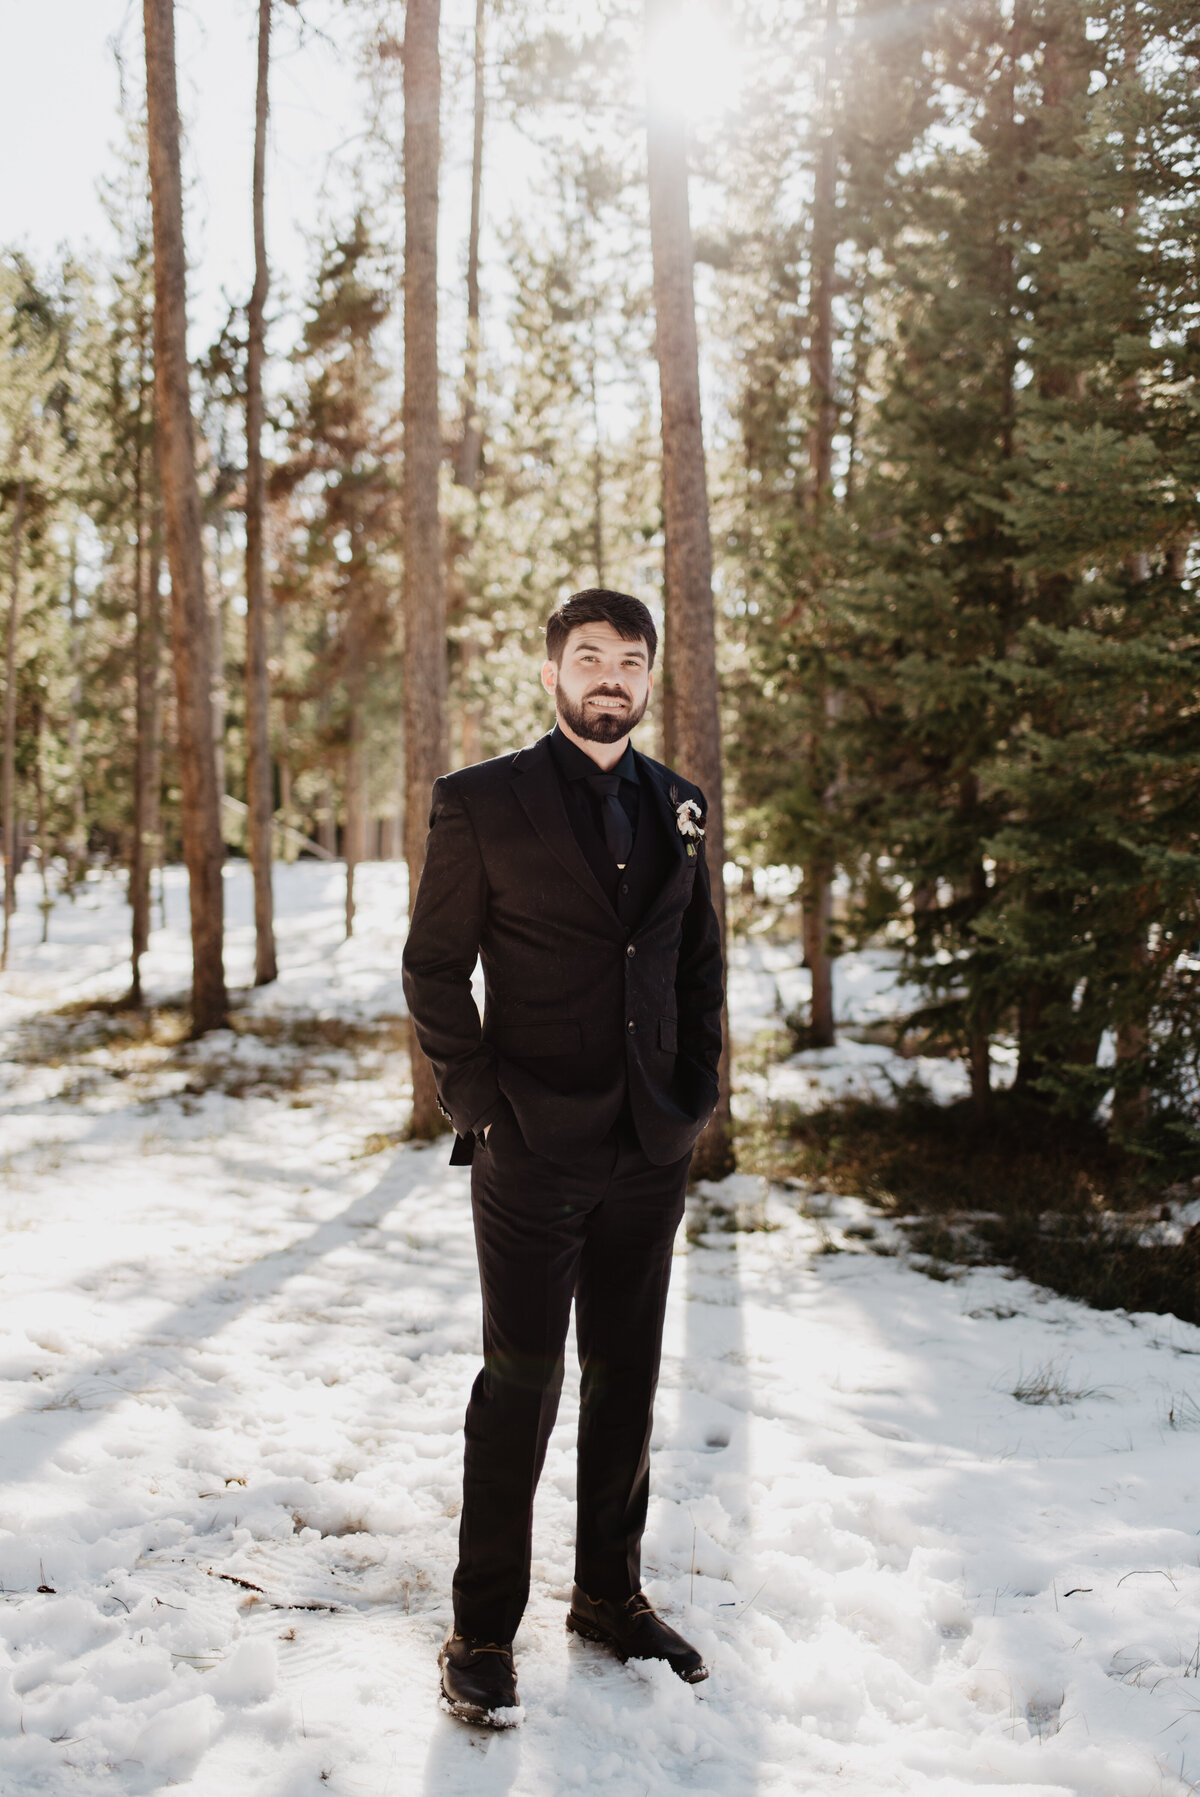 Jackson Hole Photographers capture groom standing in snowy forest